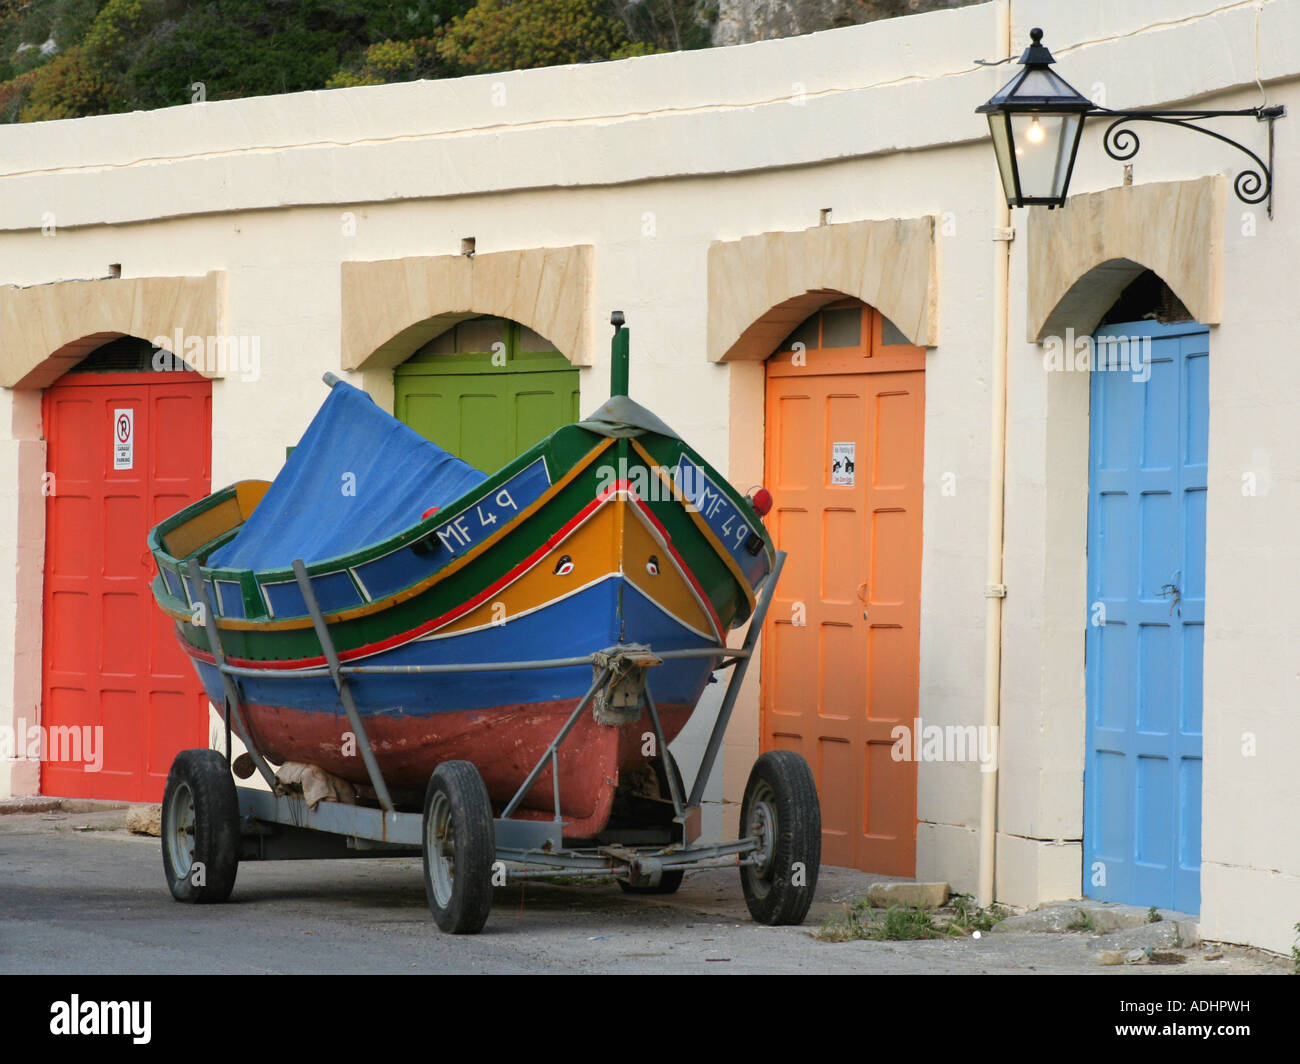 Luzzu (traditional Maltese fishing boat) on a trailer outside a row of garages at Xlendi, Gozo, Malta Stock Photo